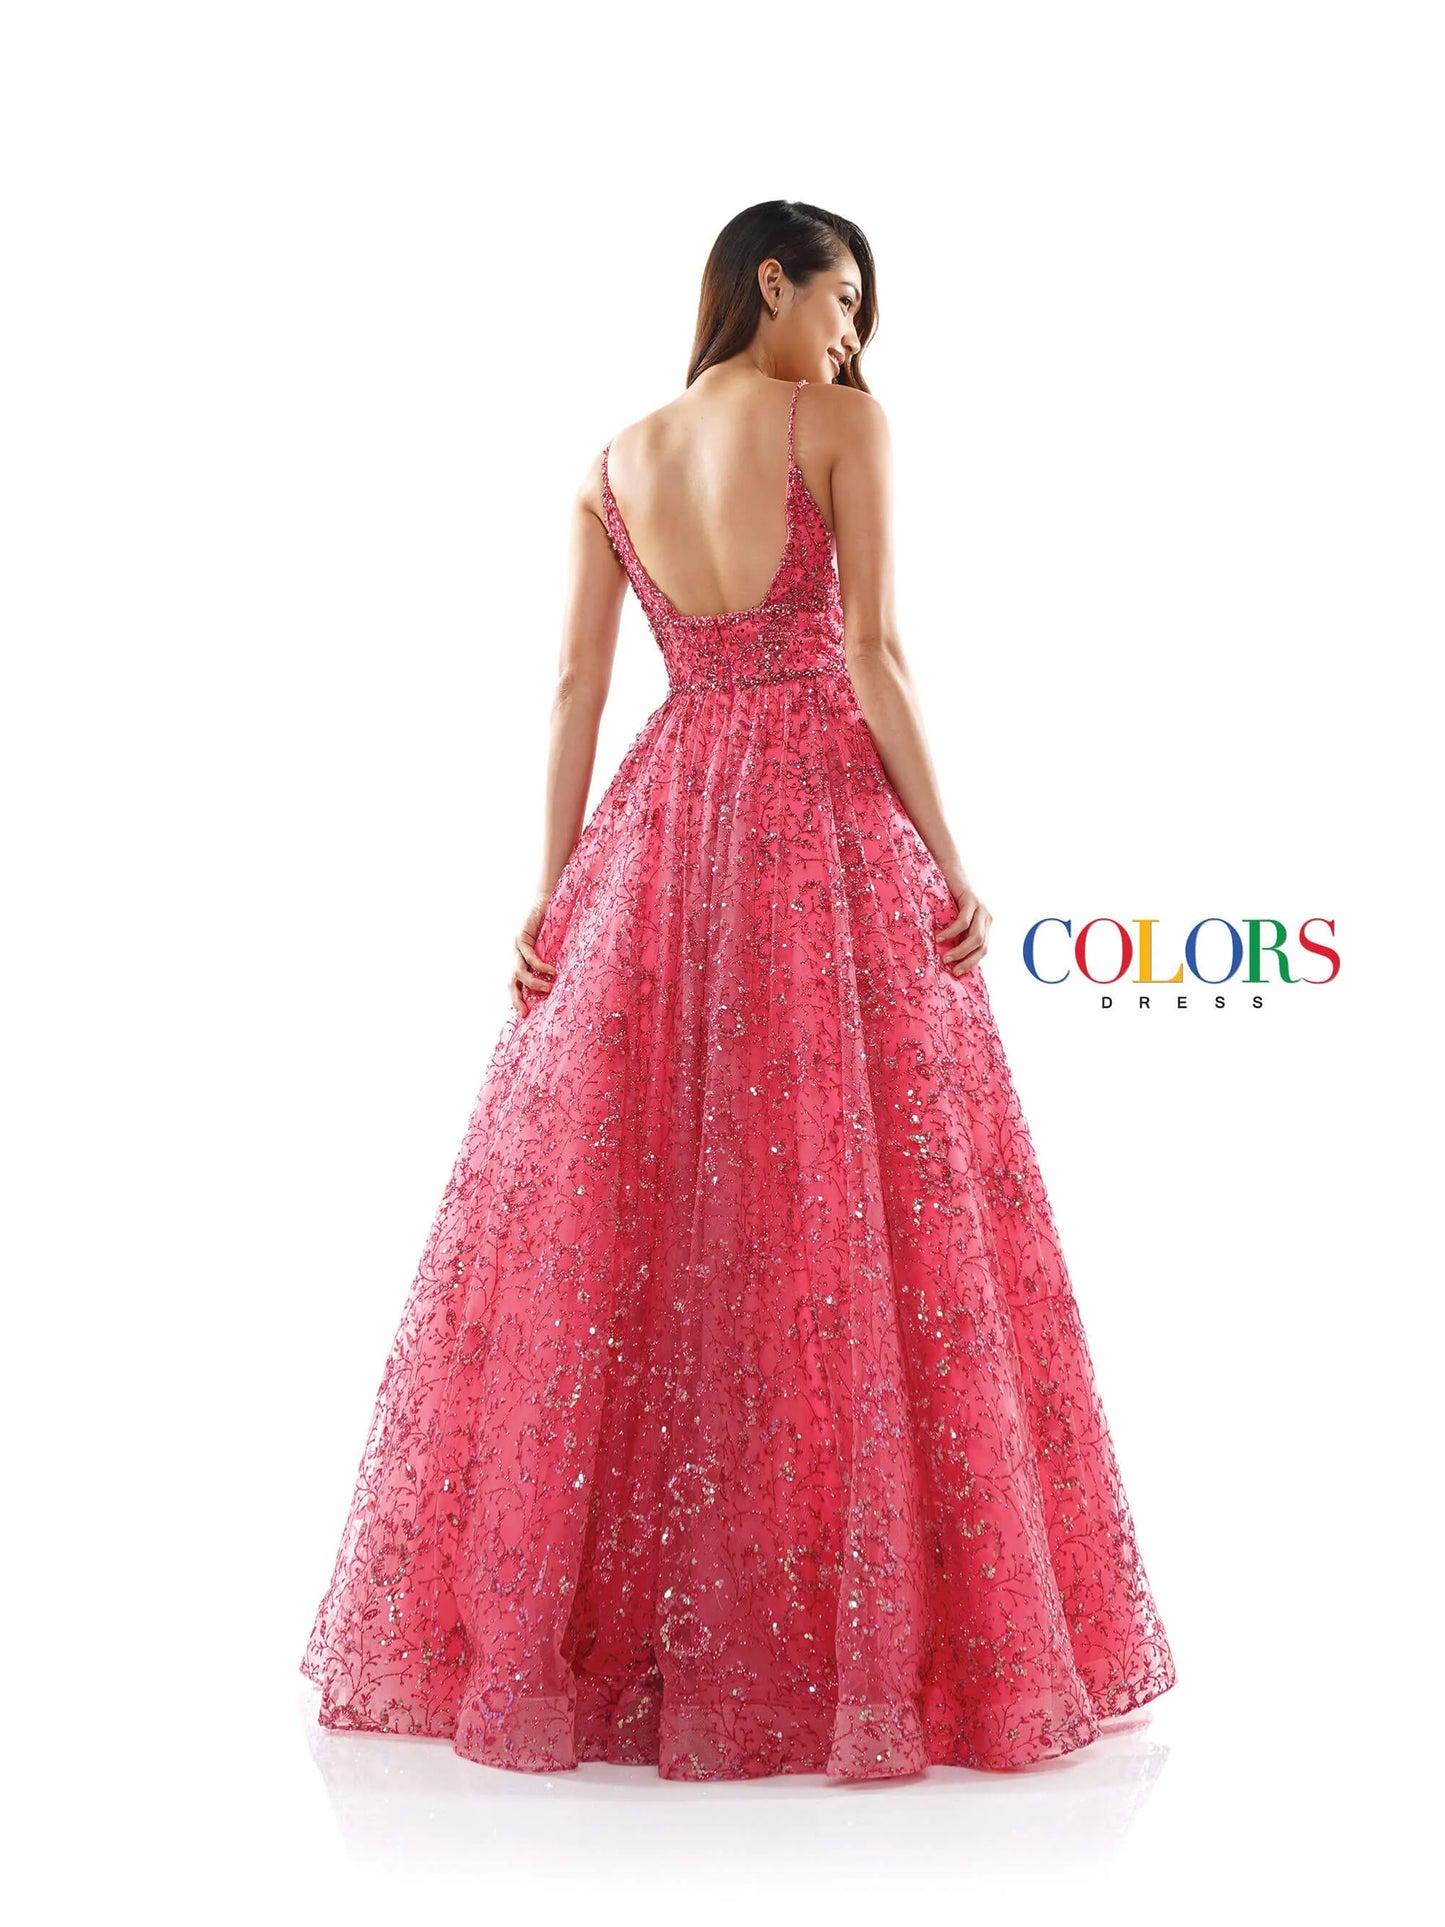 This stunning Colors Dress 2288 features a glittering sequin mesh ball gown with a plunging neckline and beautifully beaded bodice. Perfect for any formal event or pageant, this dress exudes elegance and sophistication. Make a statement and stand out from the crowd in this glamorous gown.